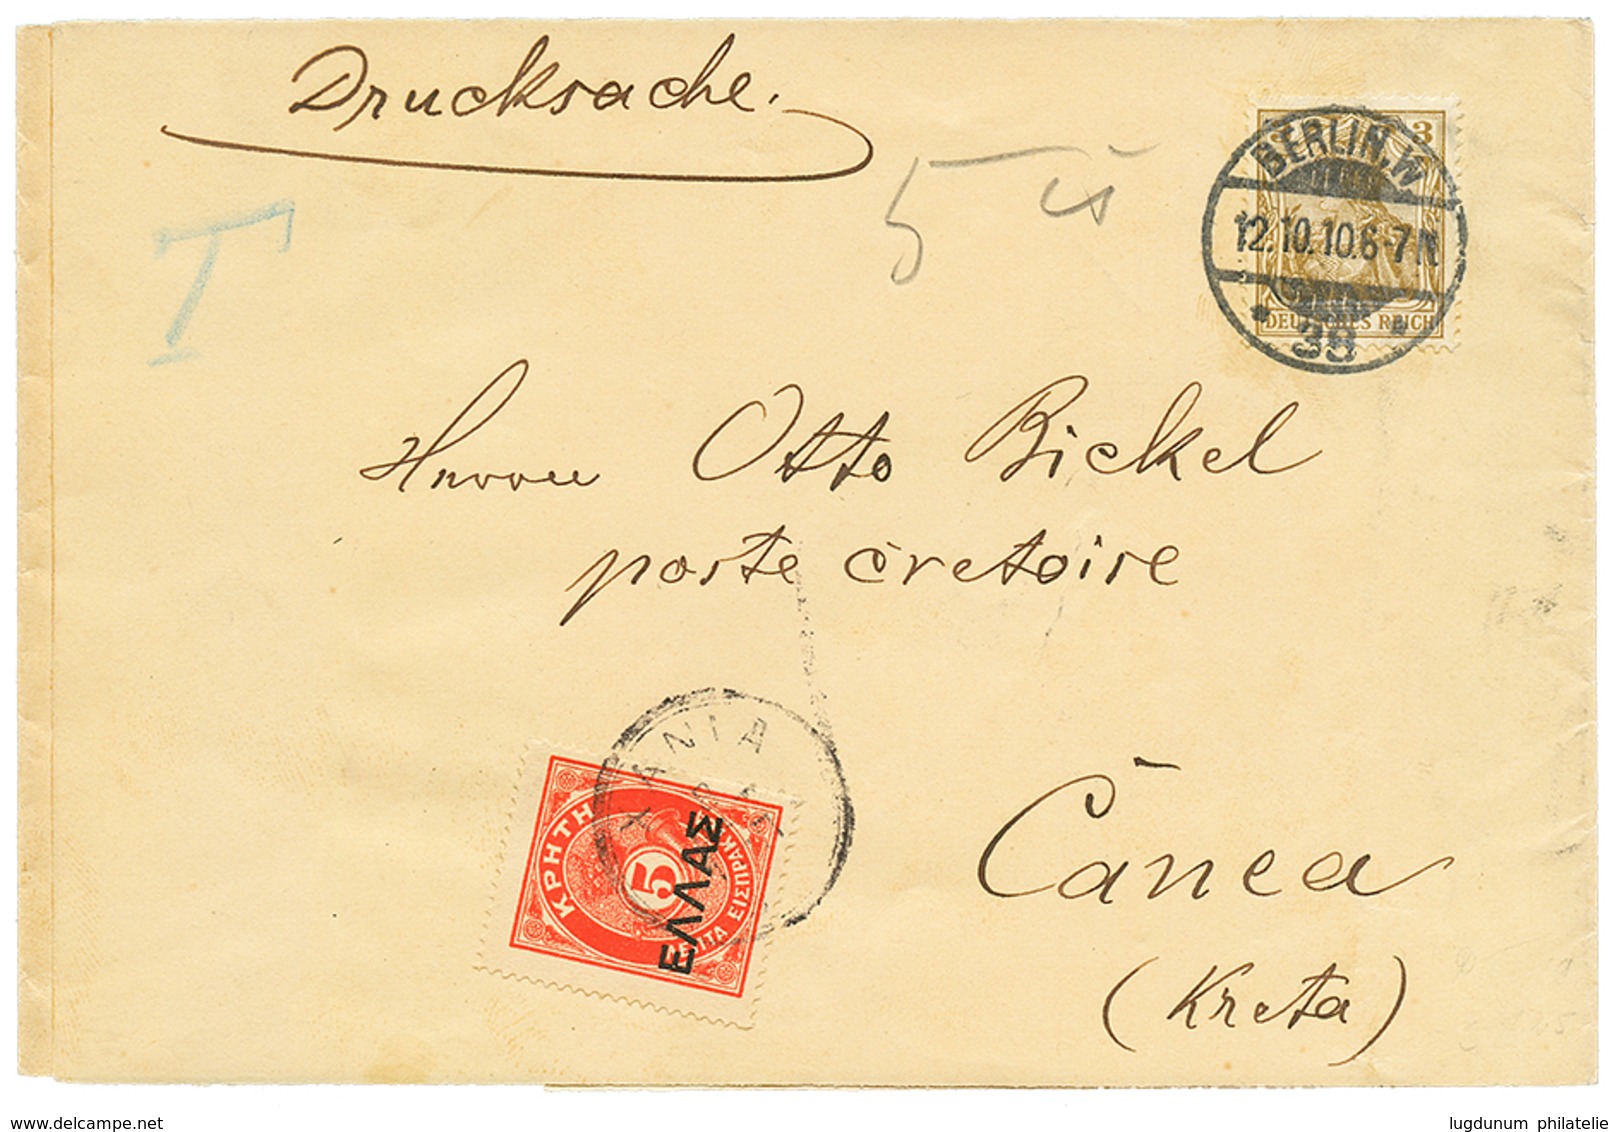 CANEA : 1910 GERMANIA 3pf Canc. BERLIN On Complete Wrapper (DRUCKSACHE) To CANEA Taxed On Arrival With CRETE 5l POSTAGE  - Levant Autrichien